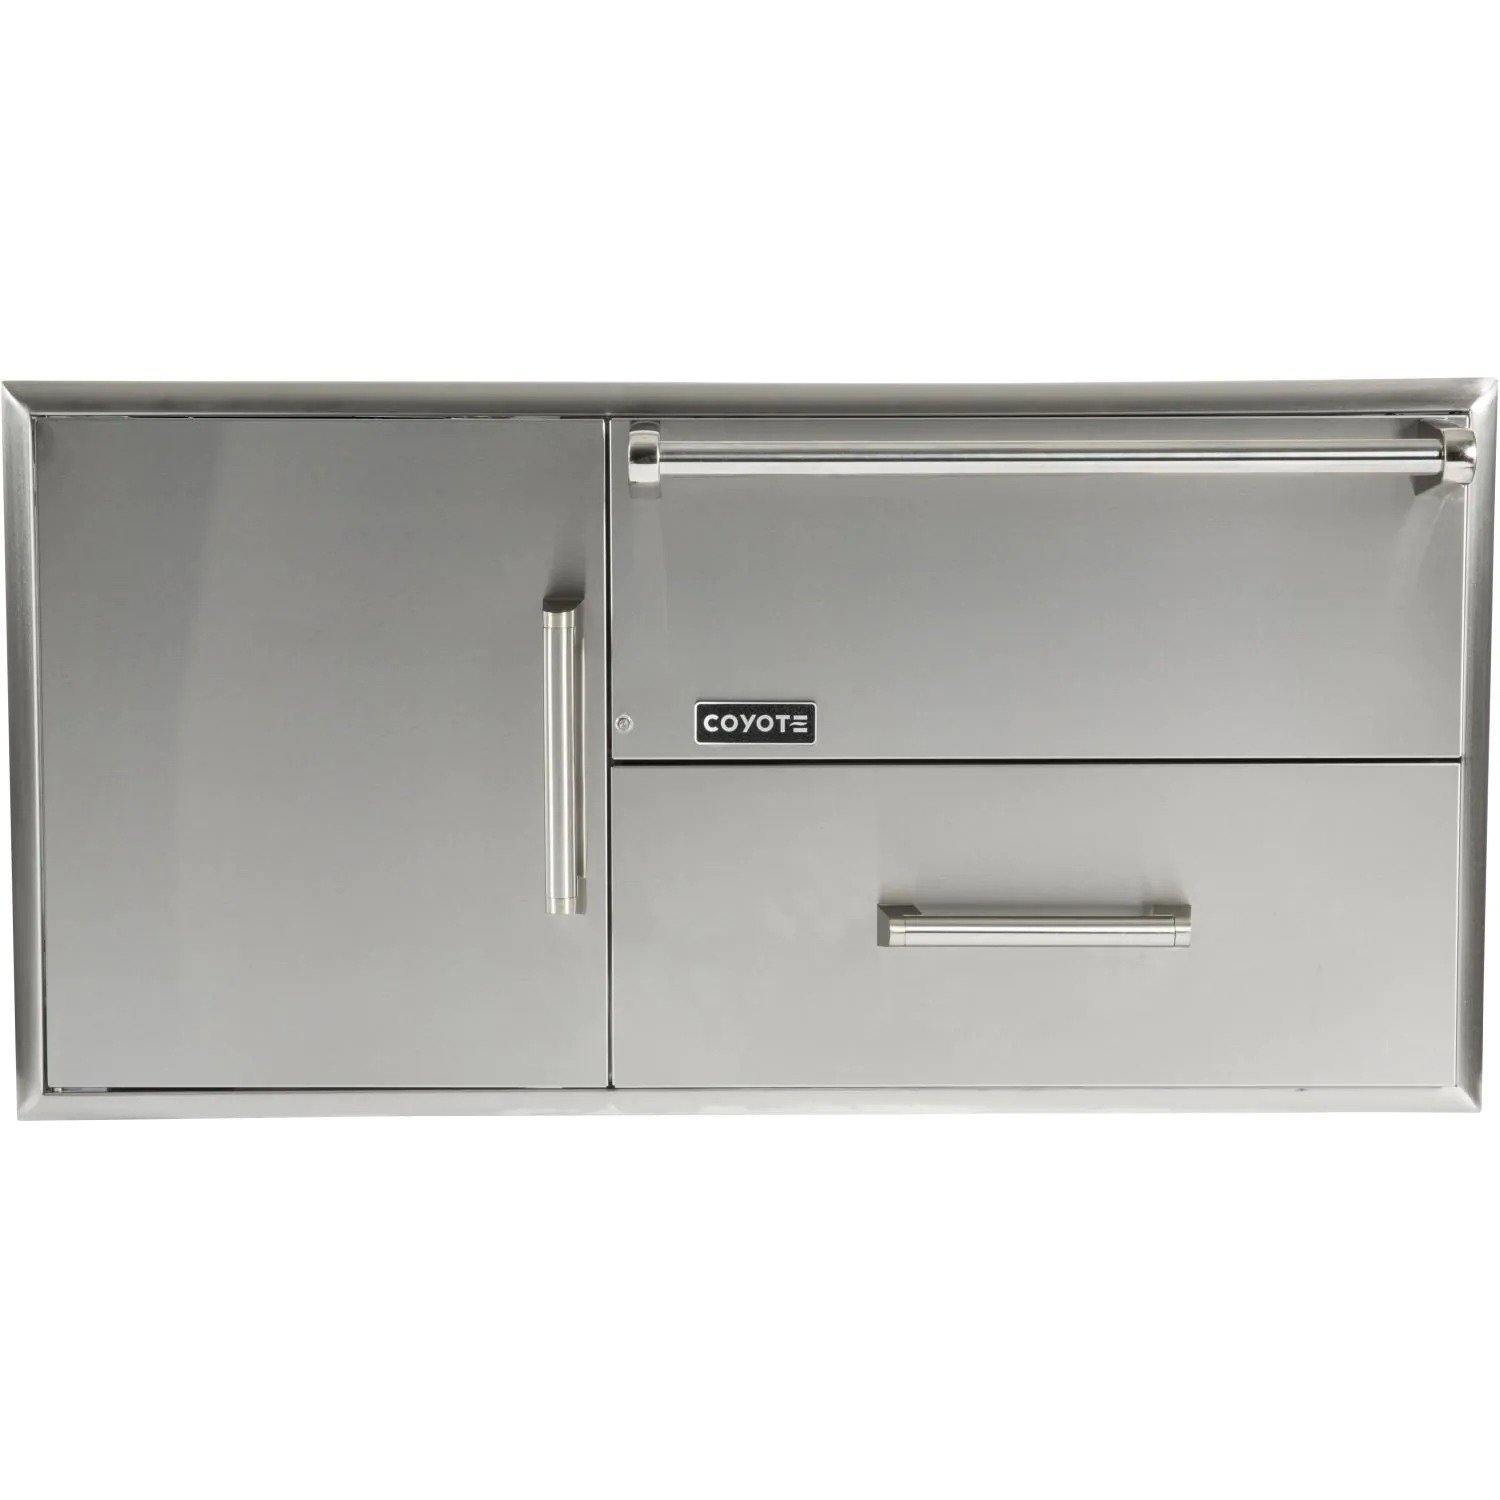 Coyote Combo Drawer Coyote - Combo Drawers: Warming Drawer plus Pullout Drawer plus Single Drawer